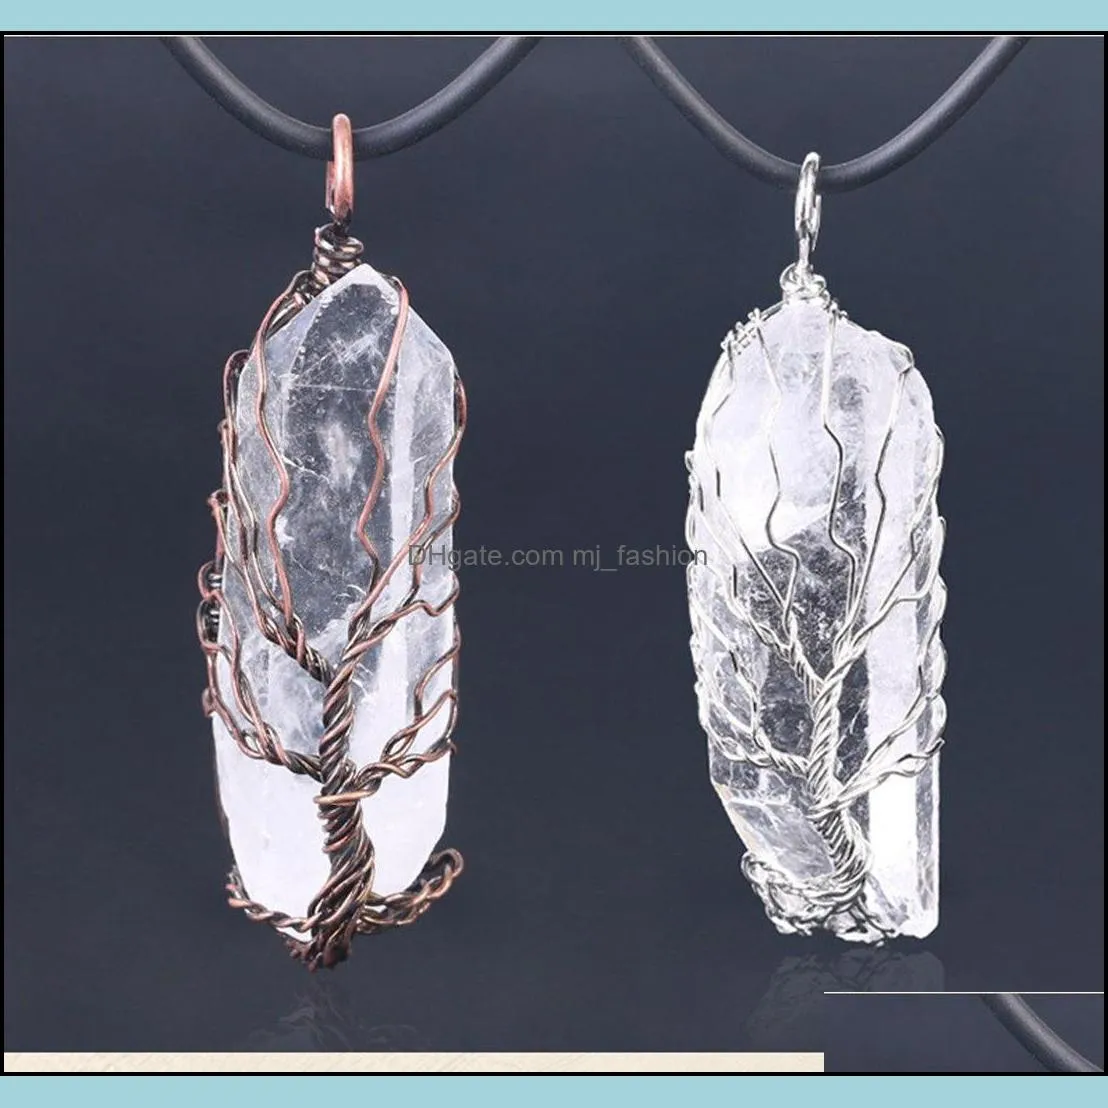 hand-wound crystal column pendant natural stone crystal necklace hexagon column pendant handmade winding necklace men and women